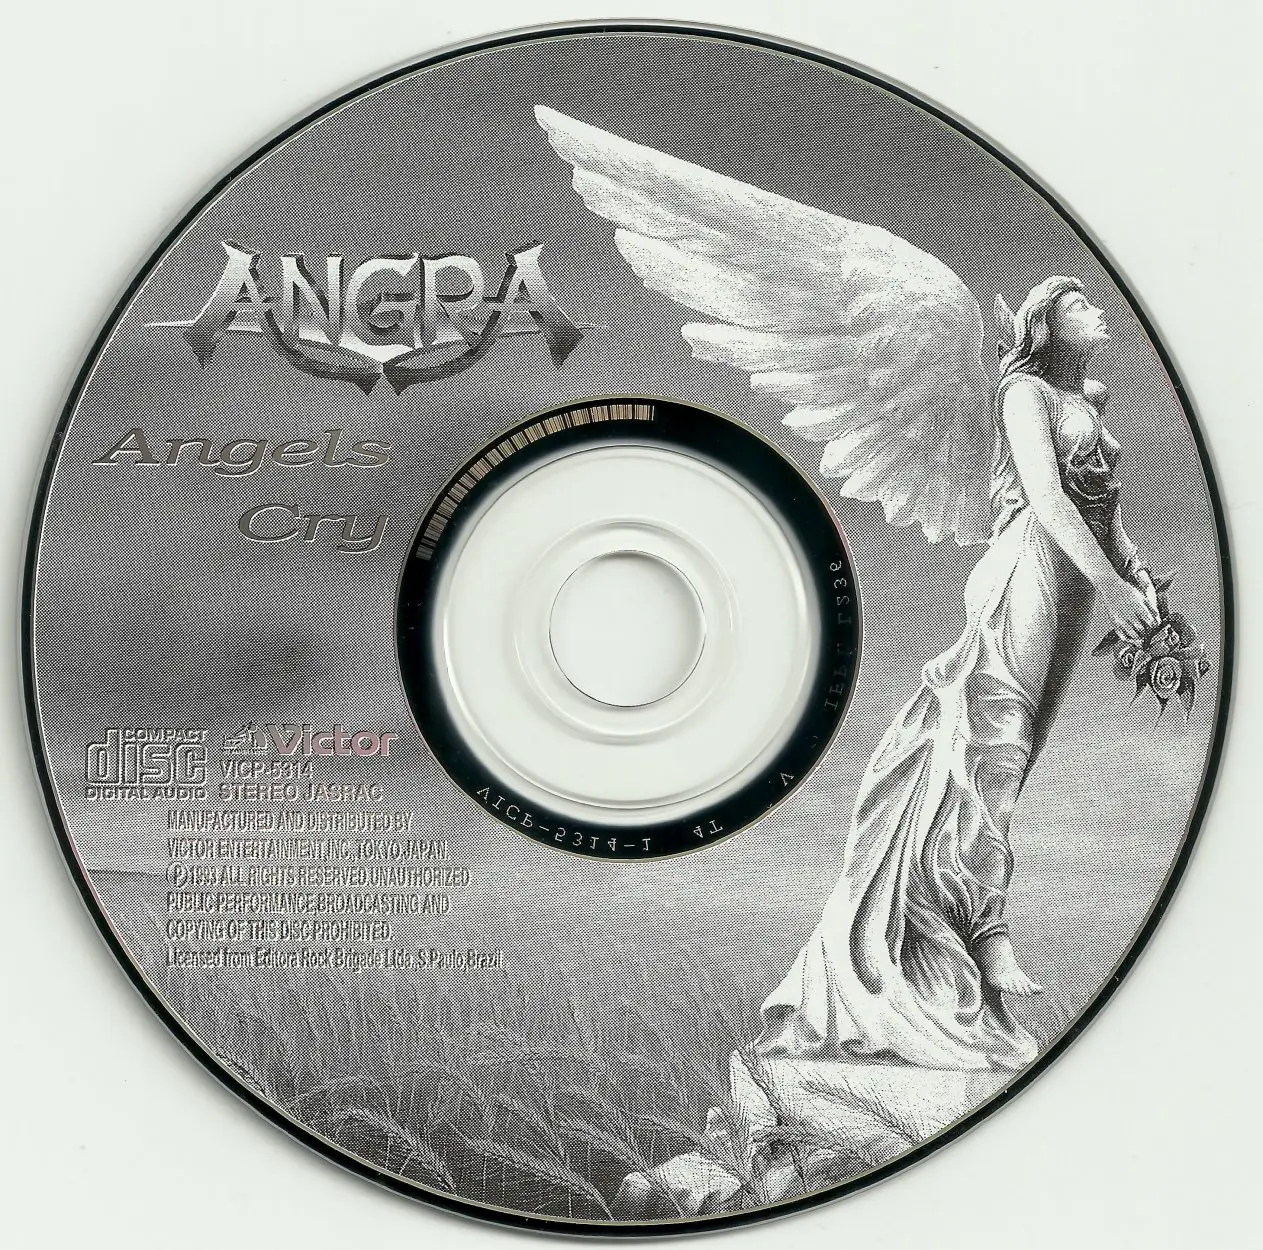 Папа песни ангел. Ноты e-Type Angels crying. Angra "Angels Cry (2cd)". Картинка хор i Cry with Angels deserve to die.